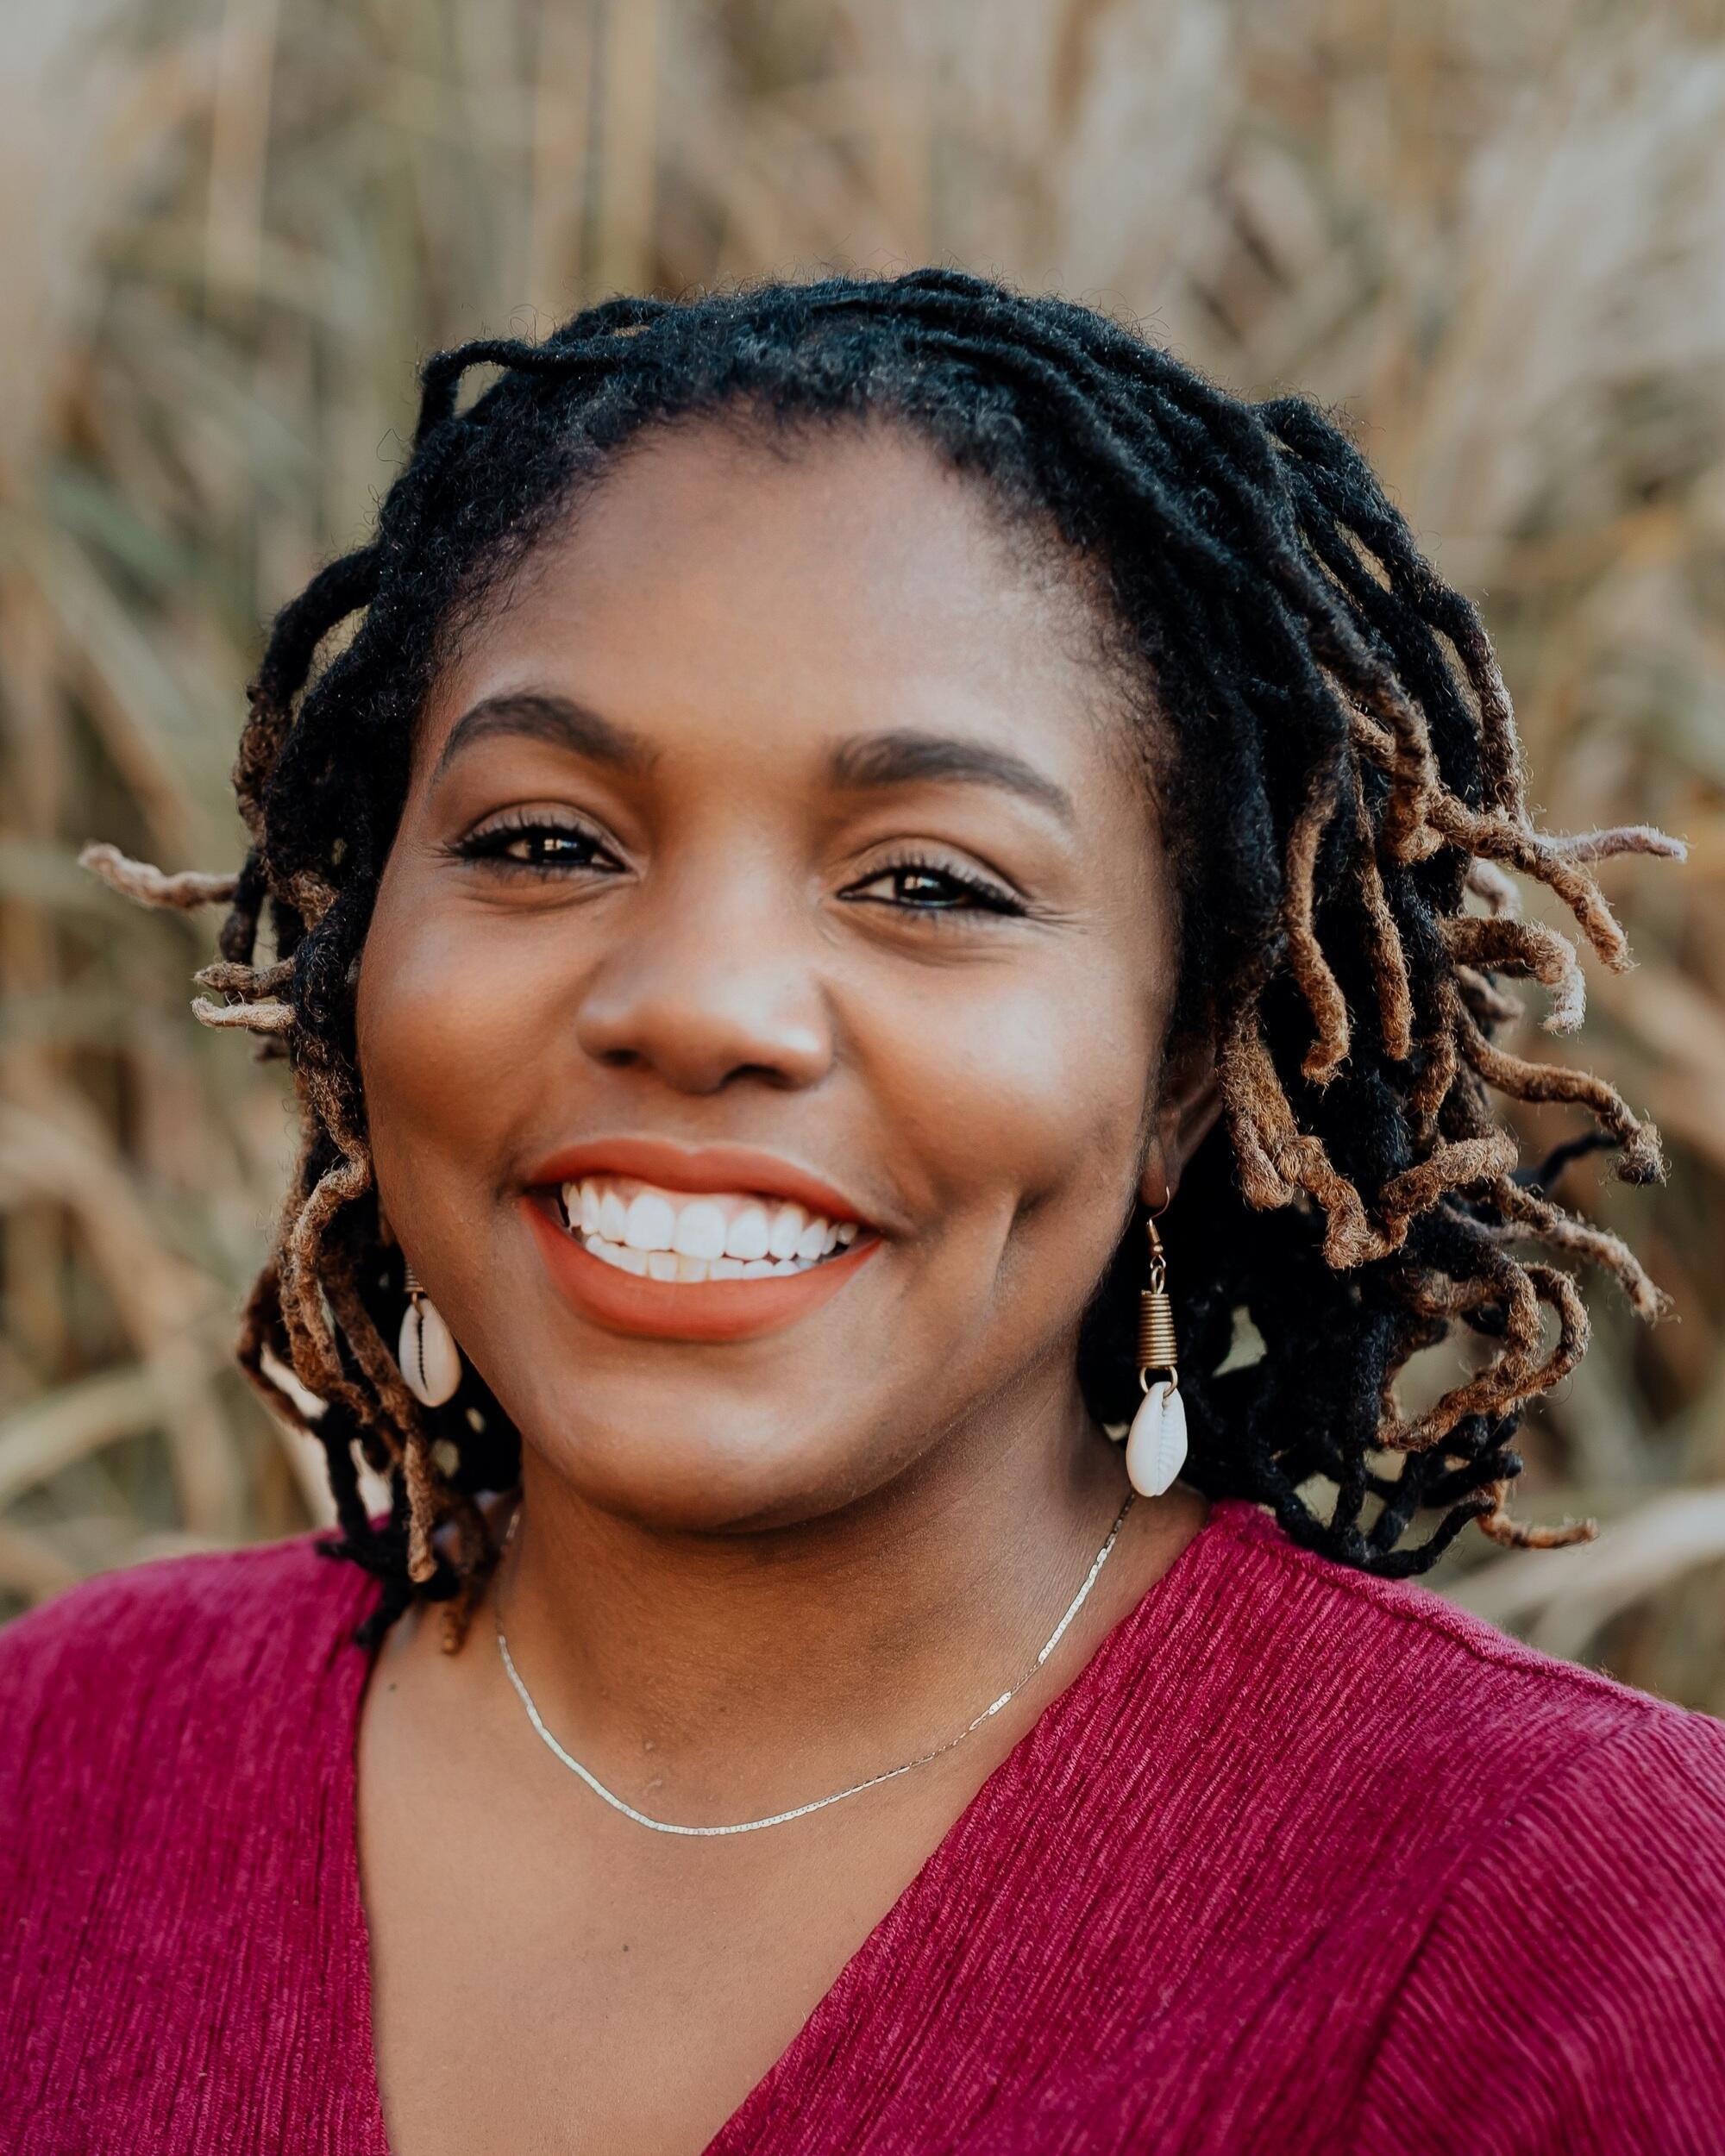 A headshot of Danielle Apugo, Ph.D., assistant professor in the VCU School of Education, studies the educational experiences, epistemologies, culture, resistance and intellectual uprising of Black women and girls in the U.S.